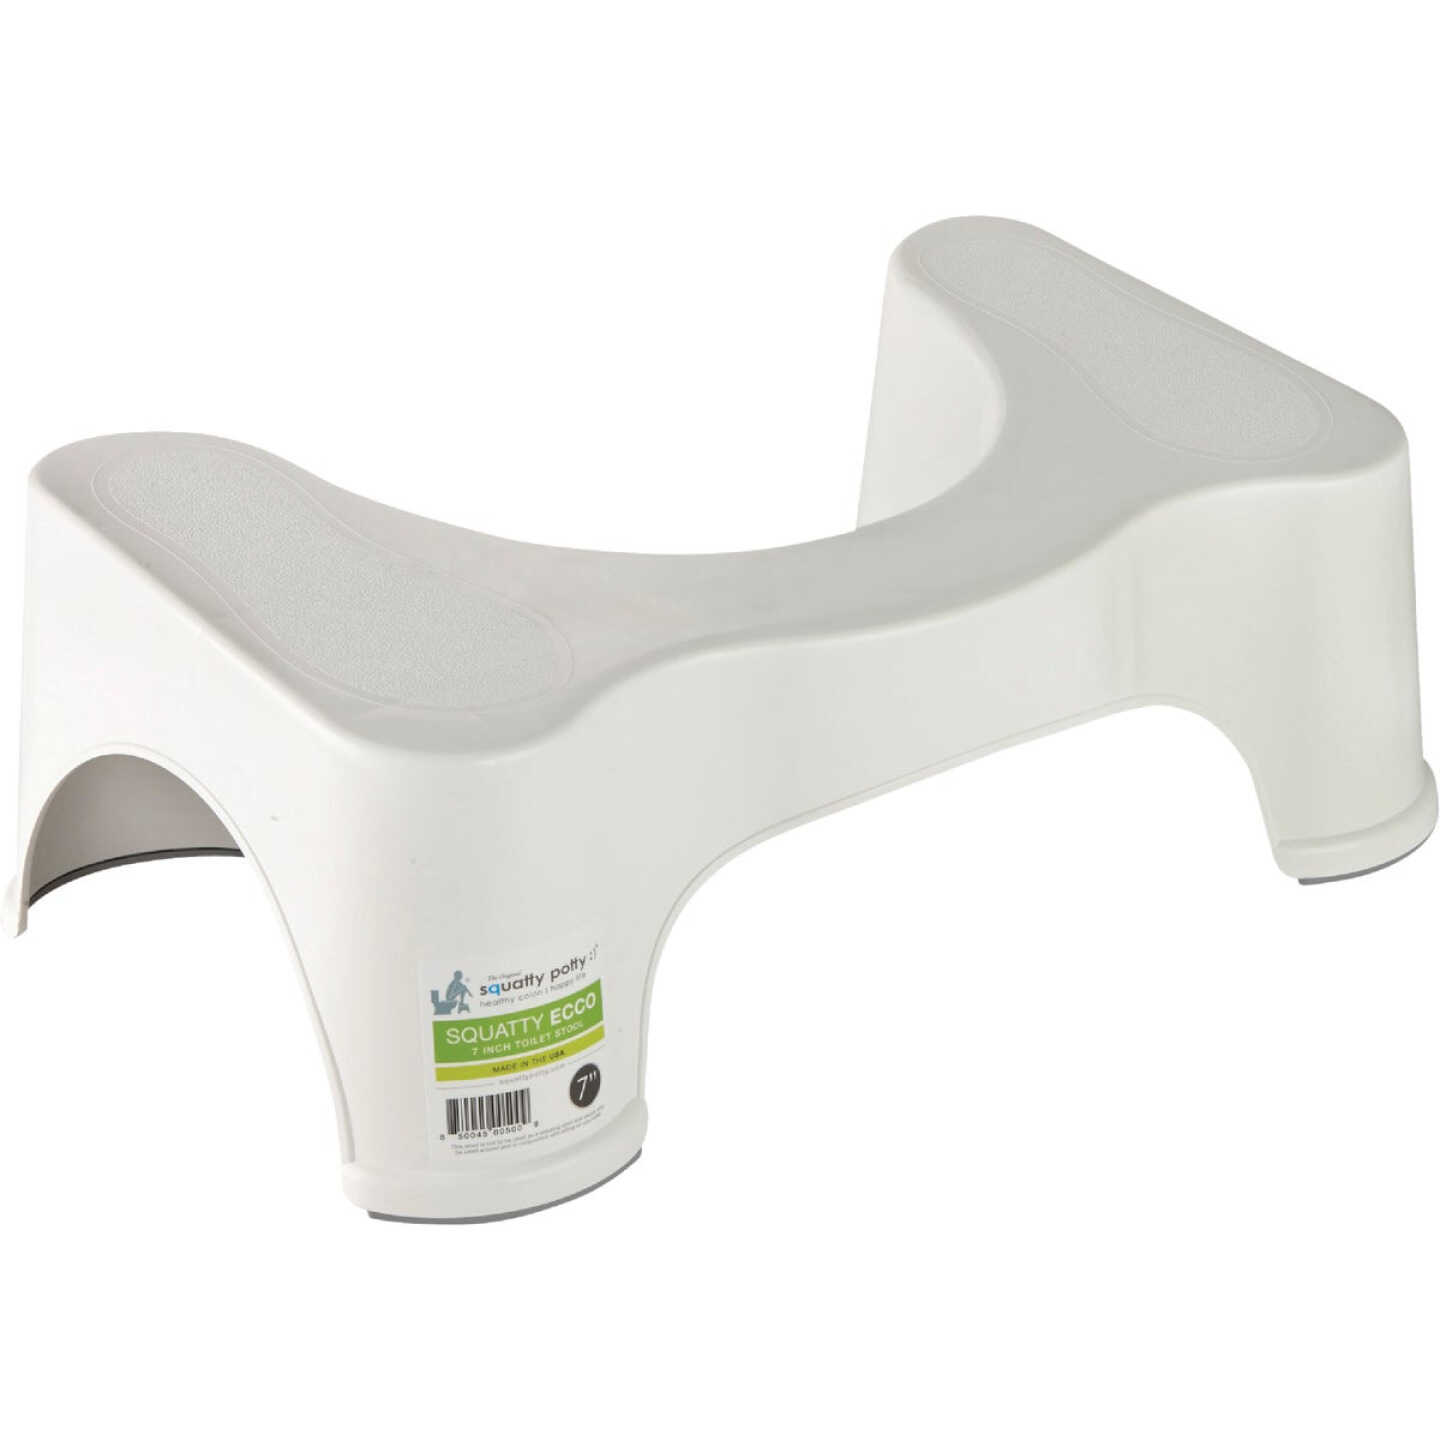 The Squatty Potty Plastic Toilet Stool - Parker's Building Supply